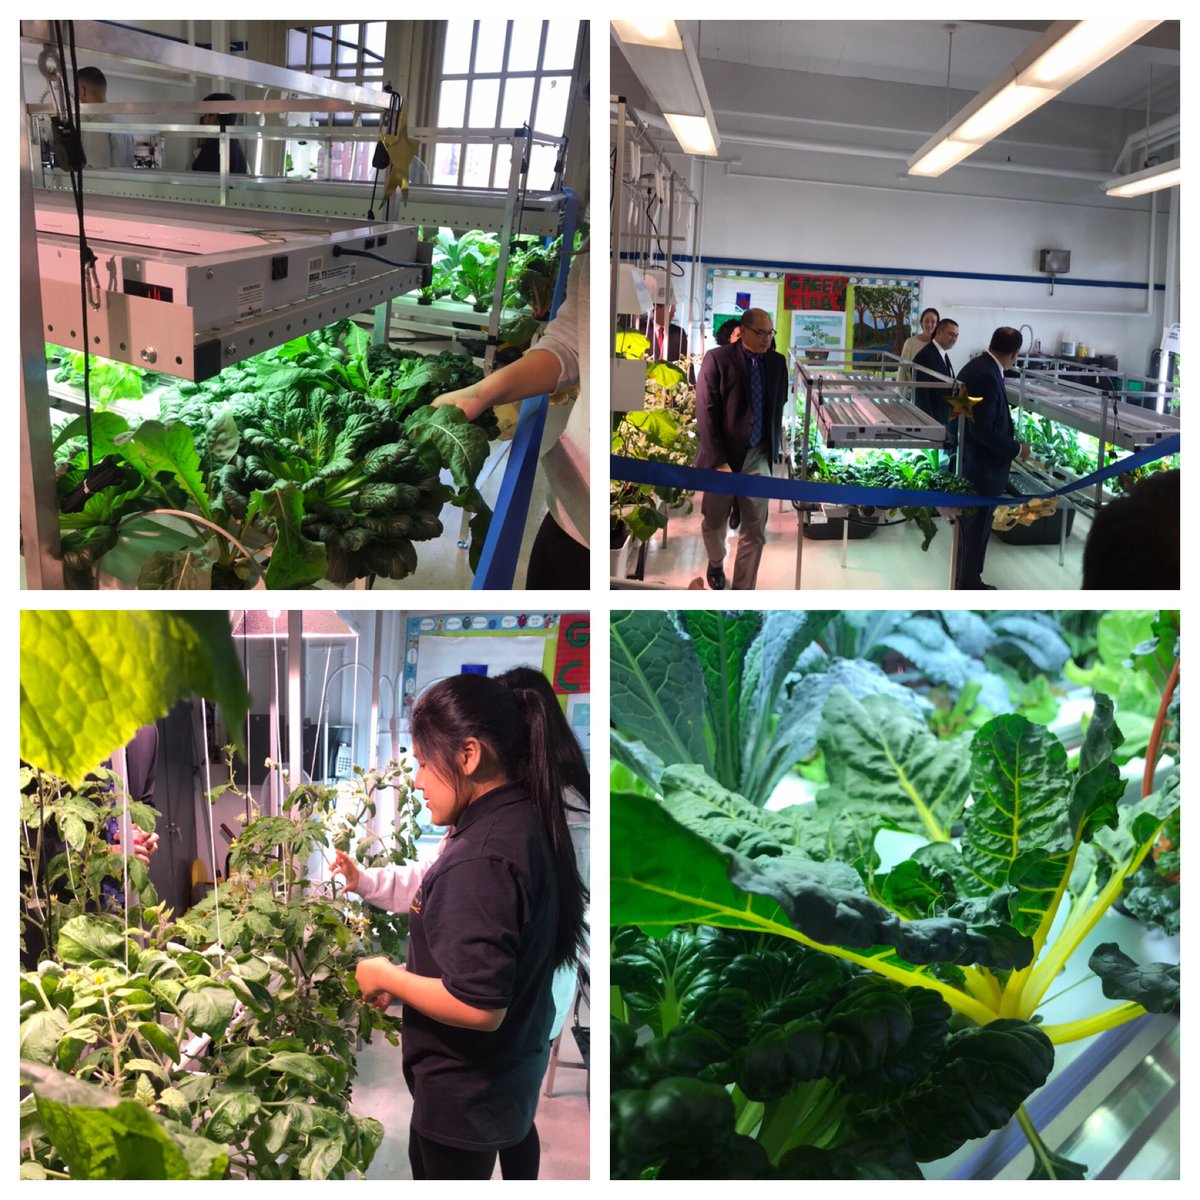 Congrats to @Is126Q for the hydroplonic lab. Very refreshing to see the leafy greens & all the hard work of the students and teachers come to life. Thank you @Costa4NY for bringing this to @nycdistrict30 schools & excited to see future projects. @Zone126Queens